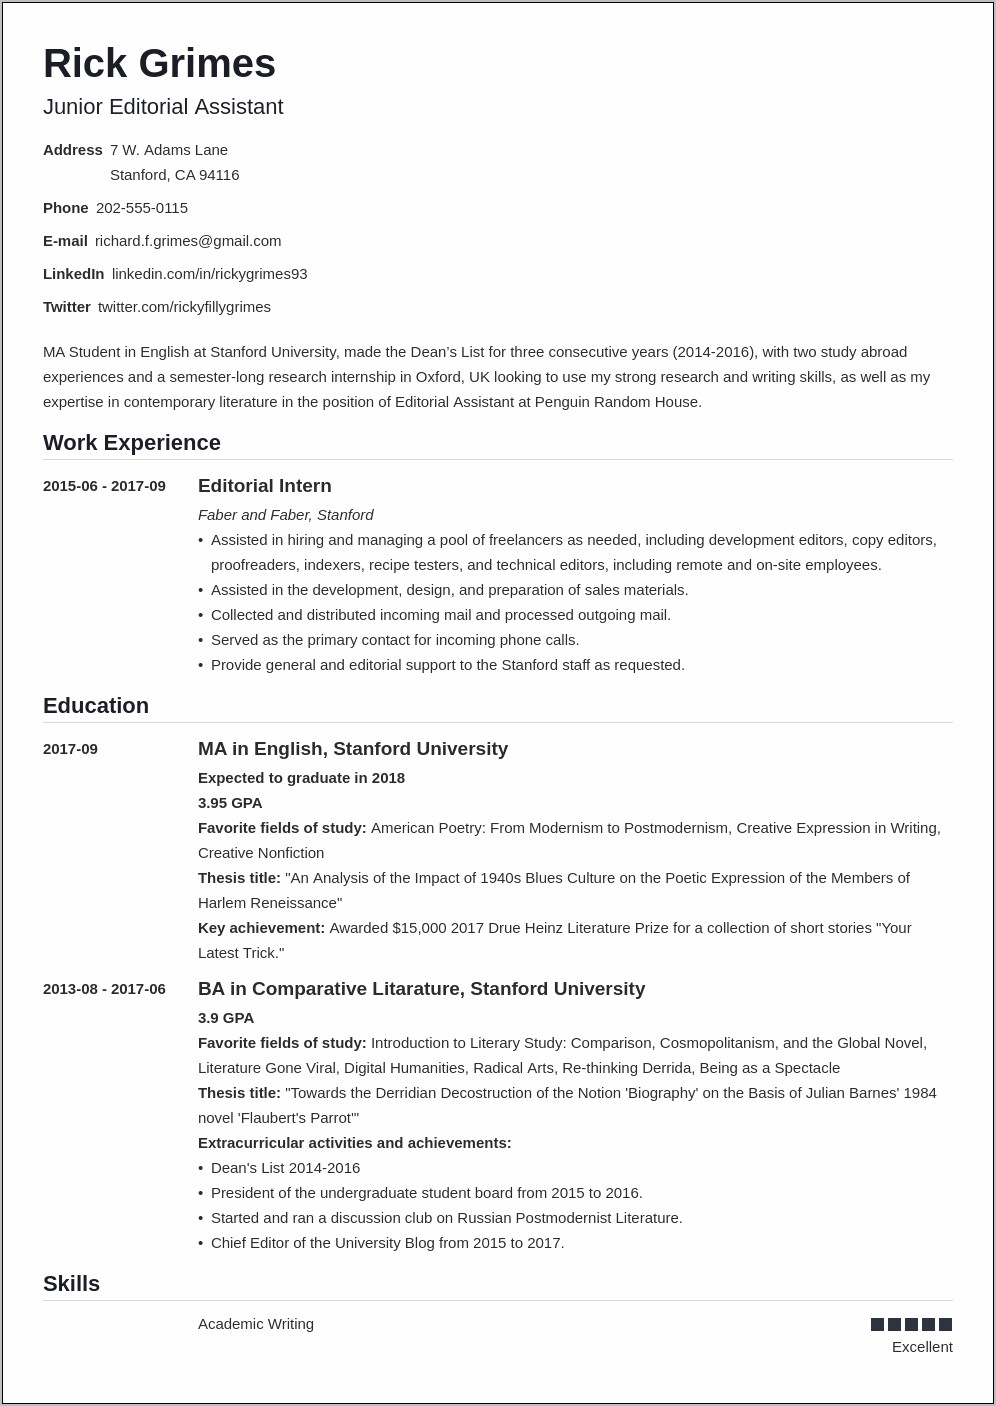 Job Summary For Resume Examples